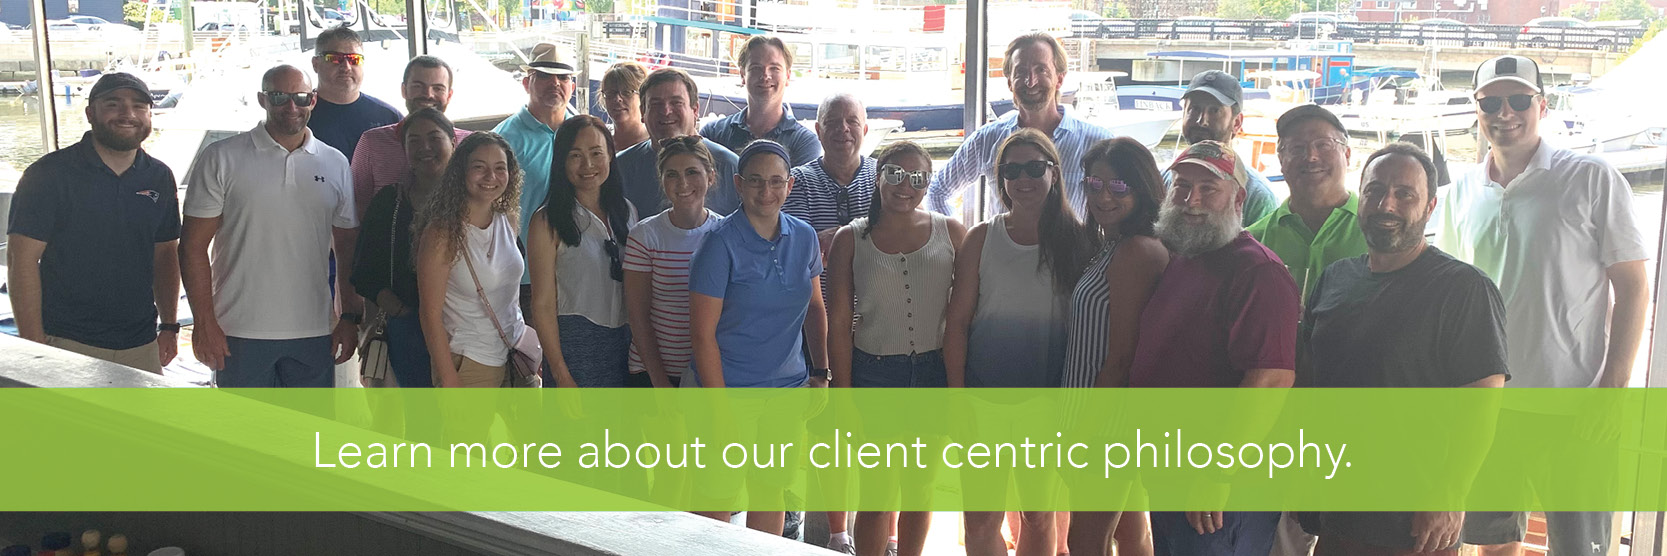 Team photo with caption: Learn more about our client centric philosophy